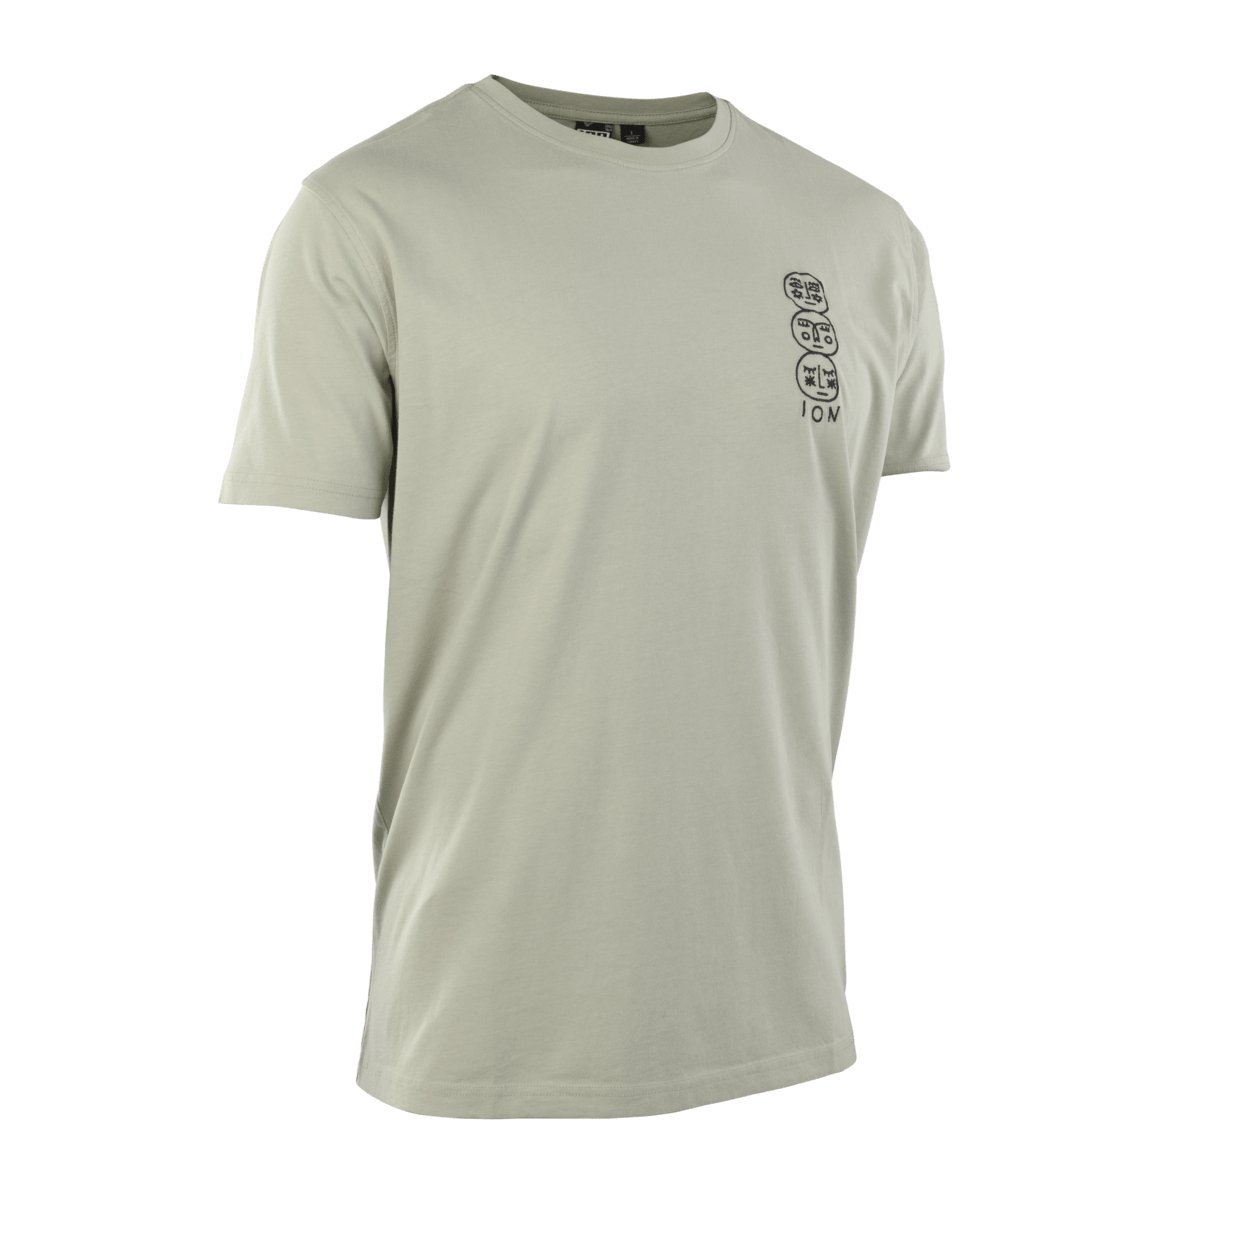 ION Tee Vibes SS men 2024 - Worthing Watersports - 9010583162454 - Apparel - ION Bike